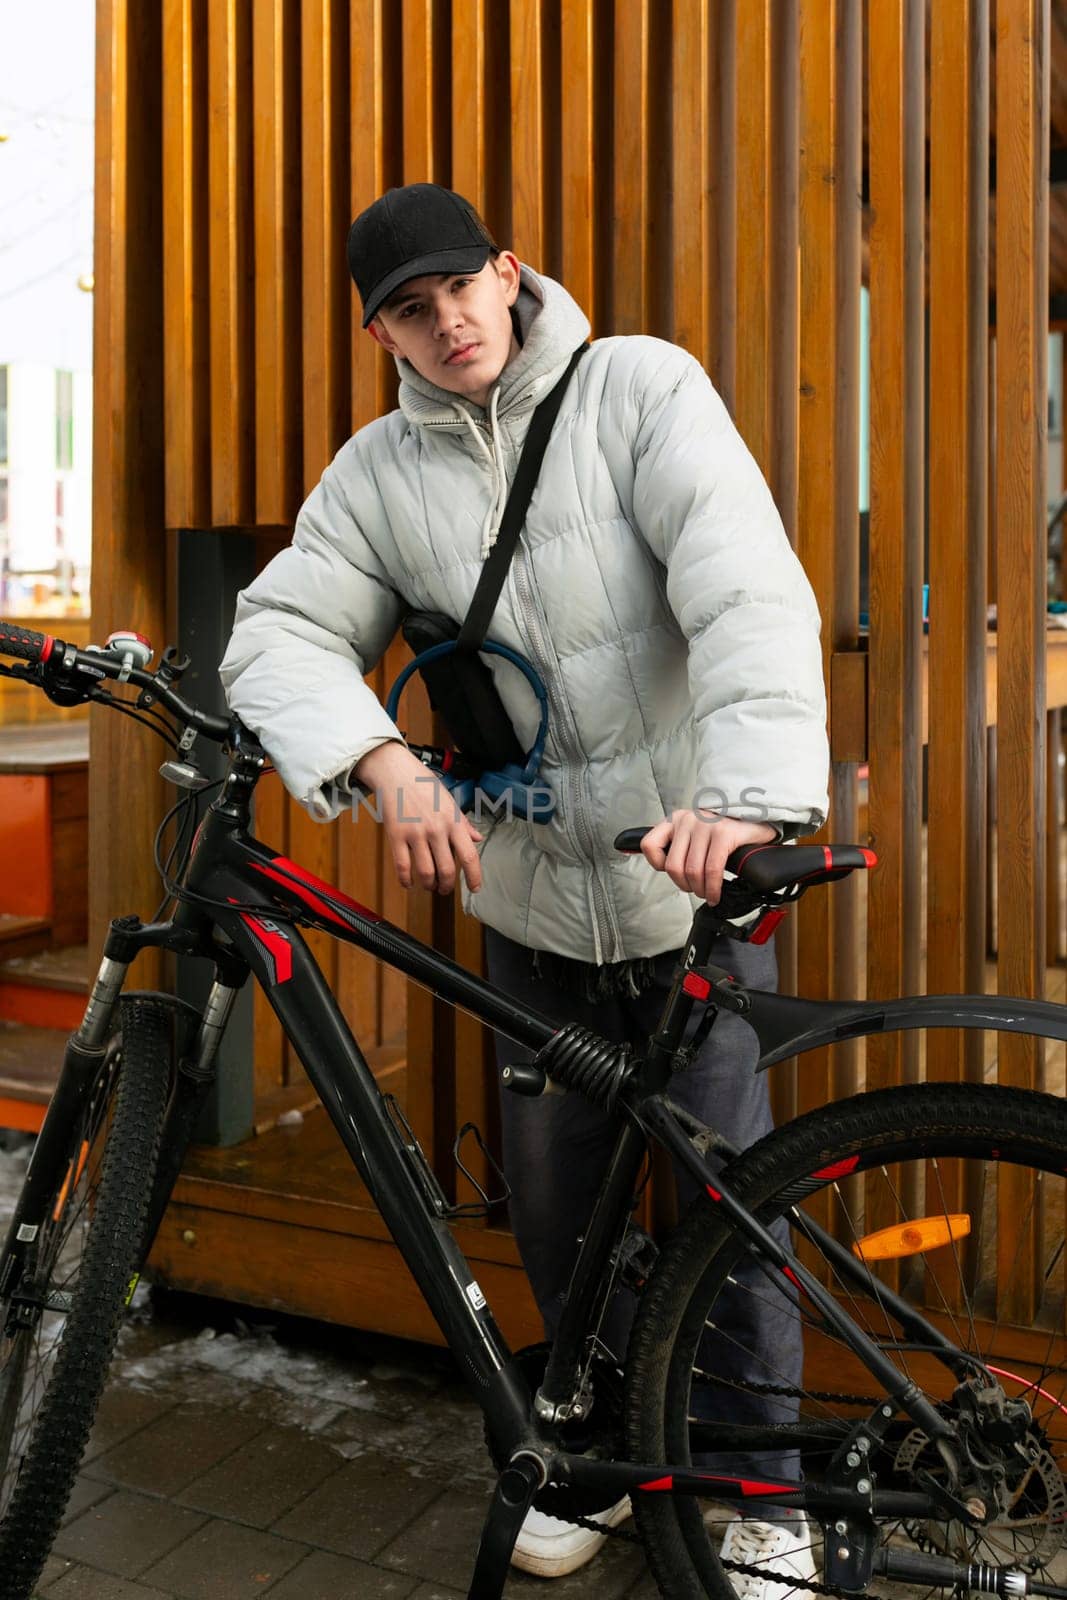 Bike rental concept. A man walks through the city in winter with a bicycle by TRMK